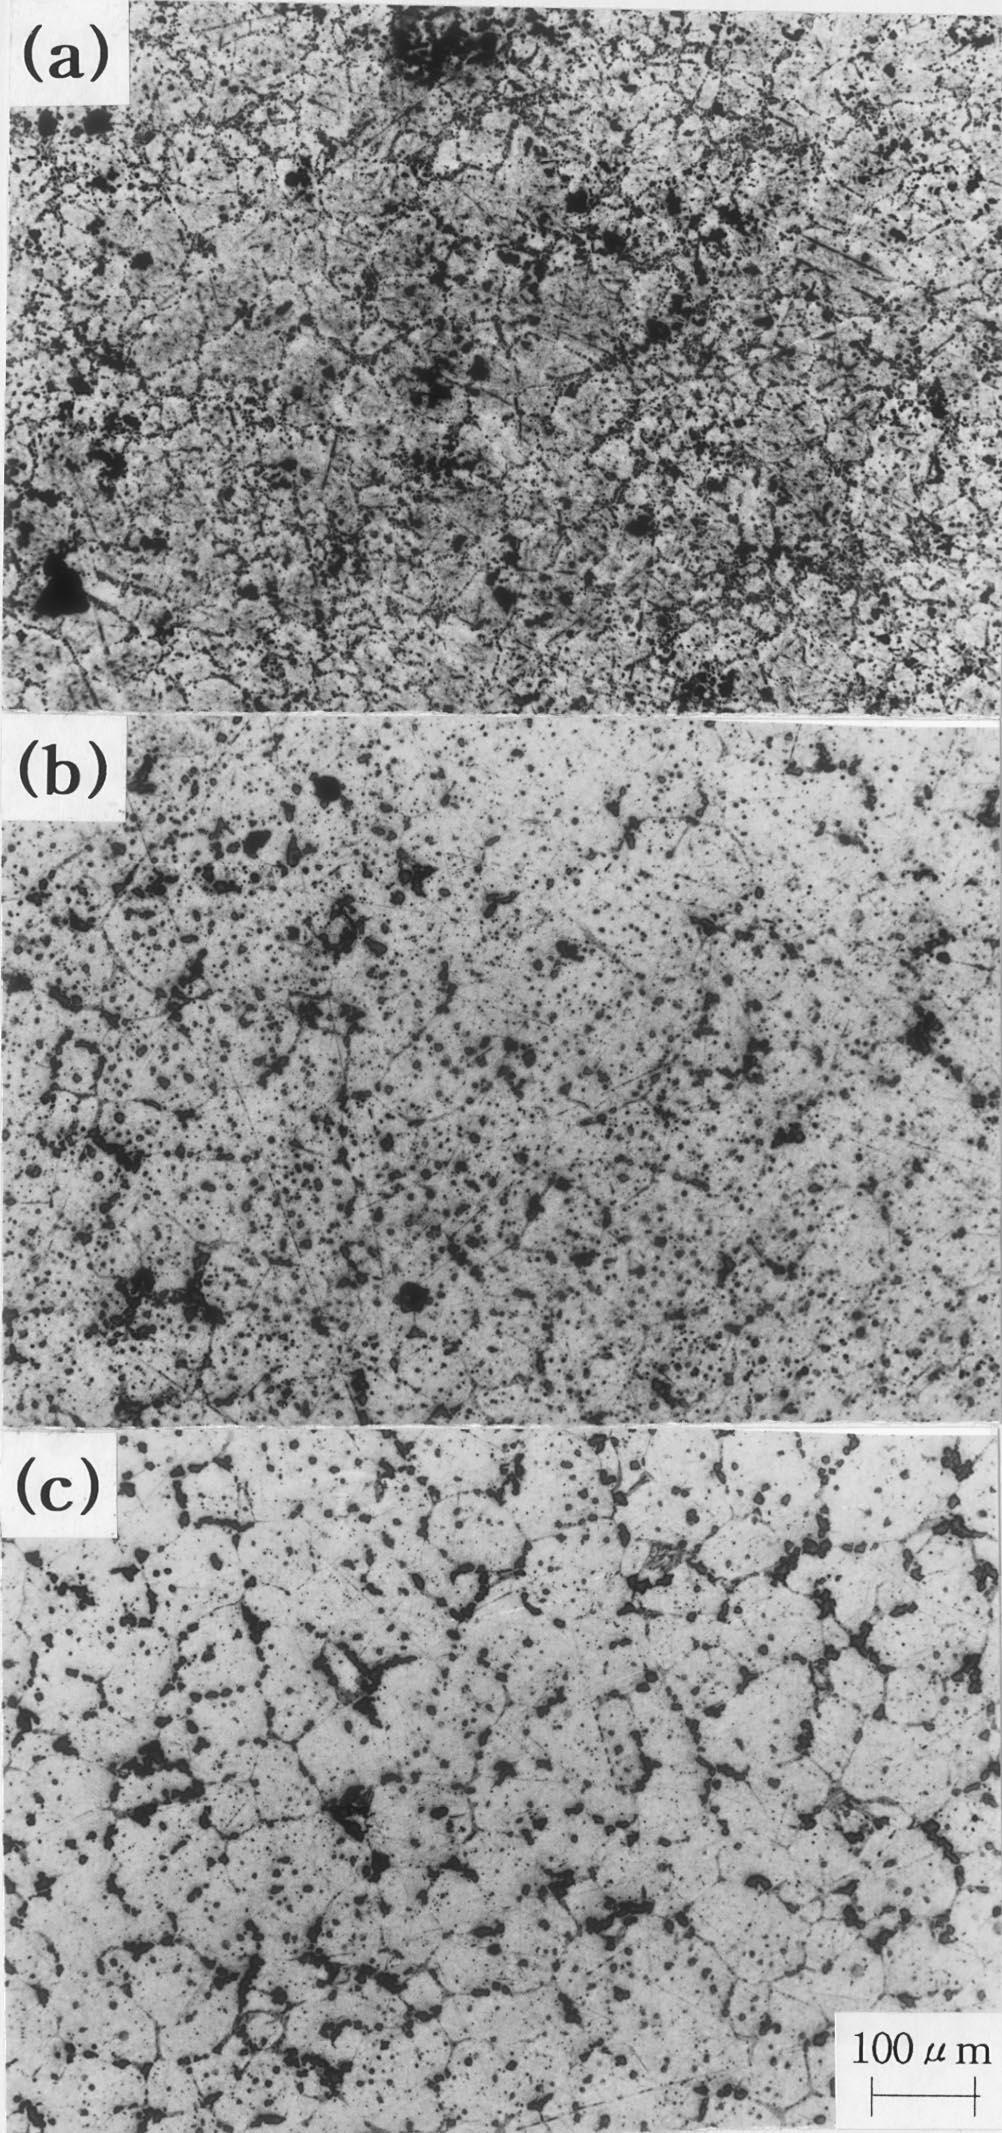 544 kw). experiment 12. The globular microstructure was not obtained at positions (a), (b), and (c) of Figure 1.